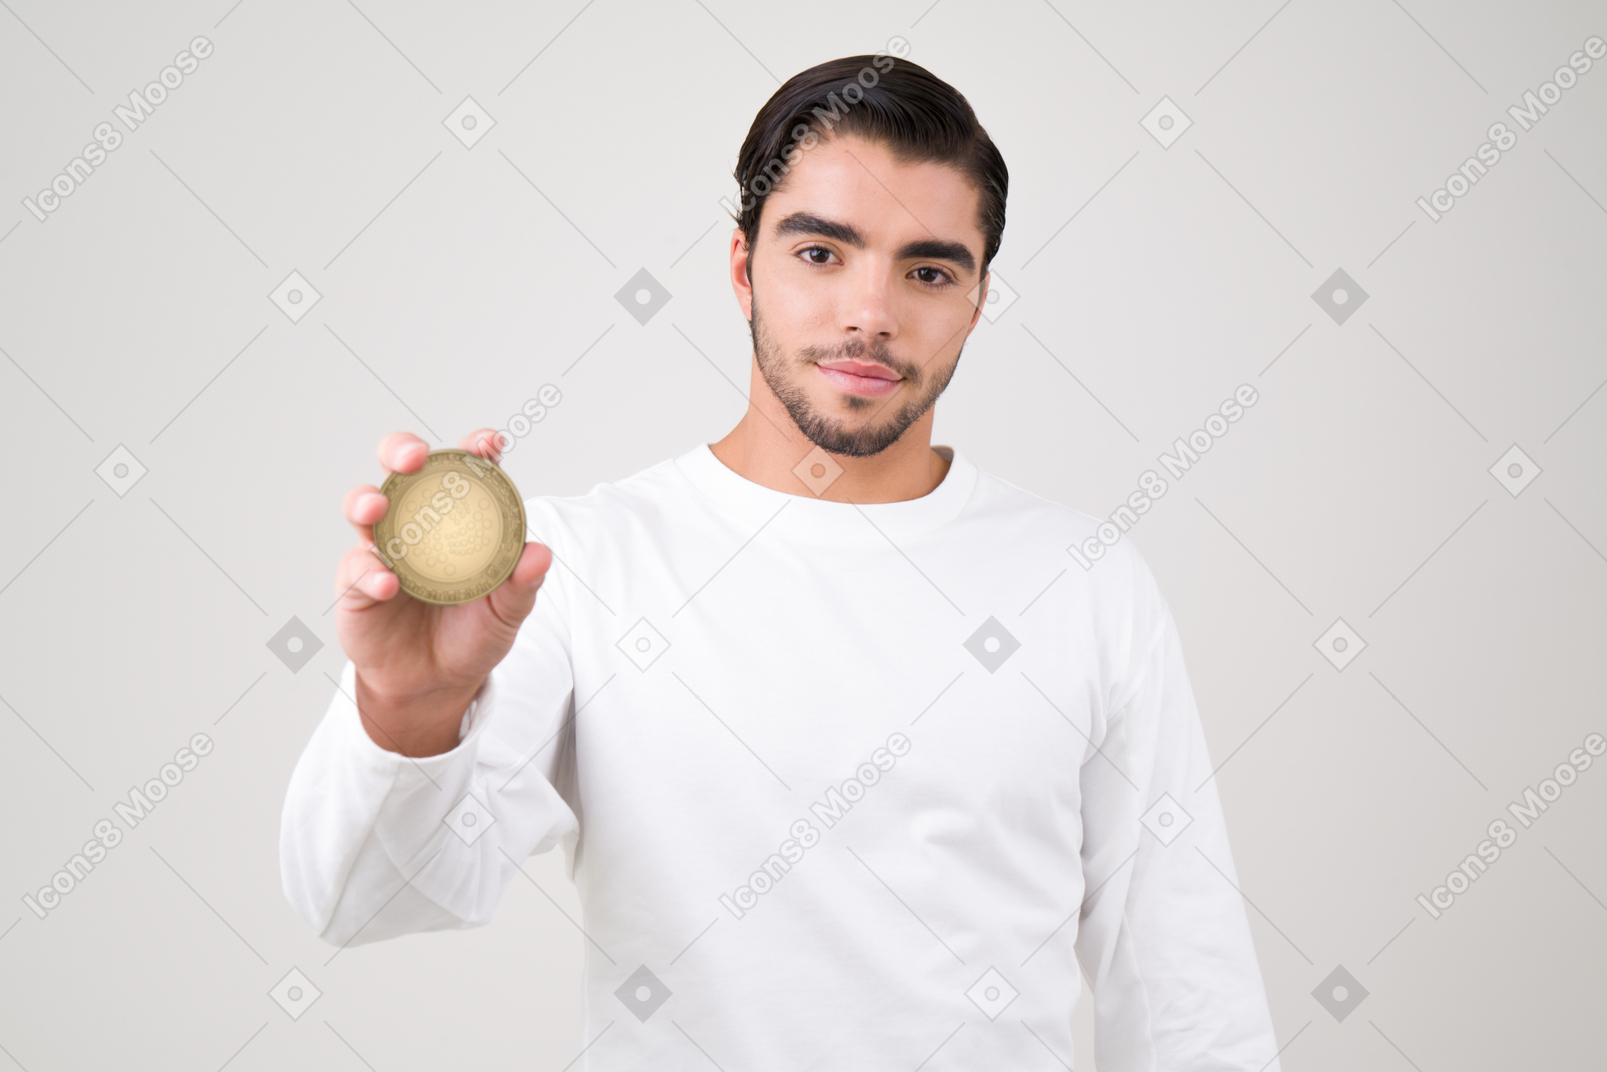 Handsome young man holding an iota coin